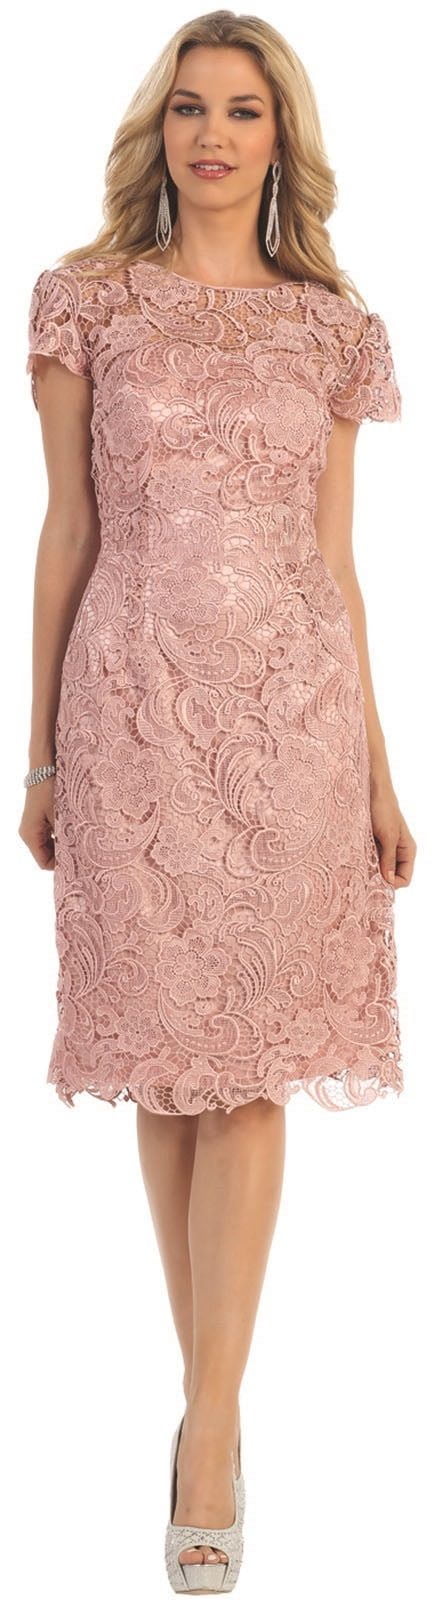 SHORT SLEEVE MOTHER OF THE BRIDE LACE DRESS - Walmart.com